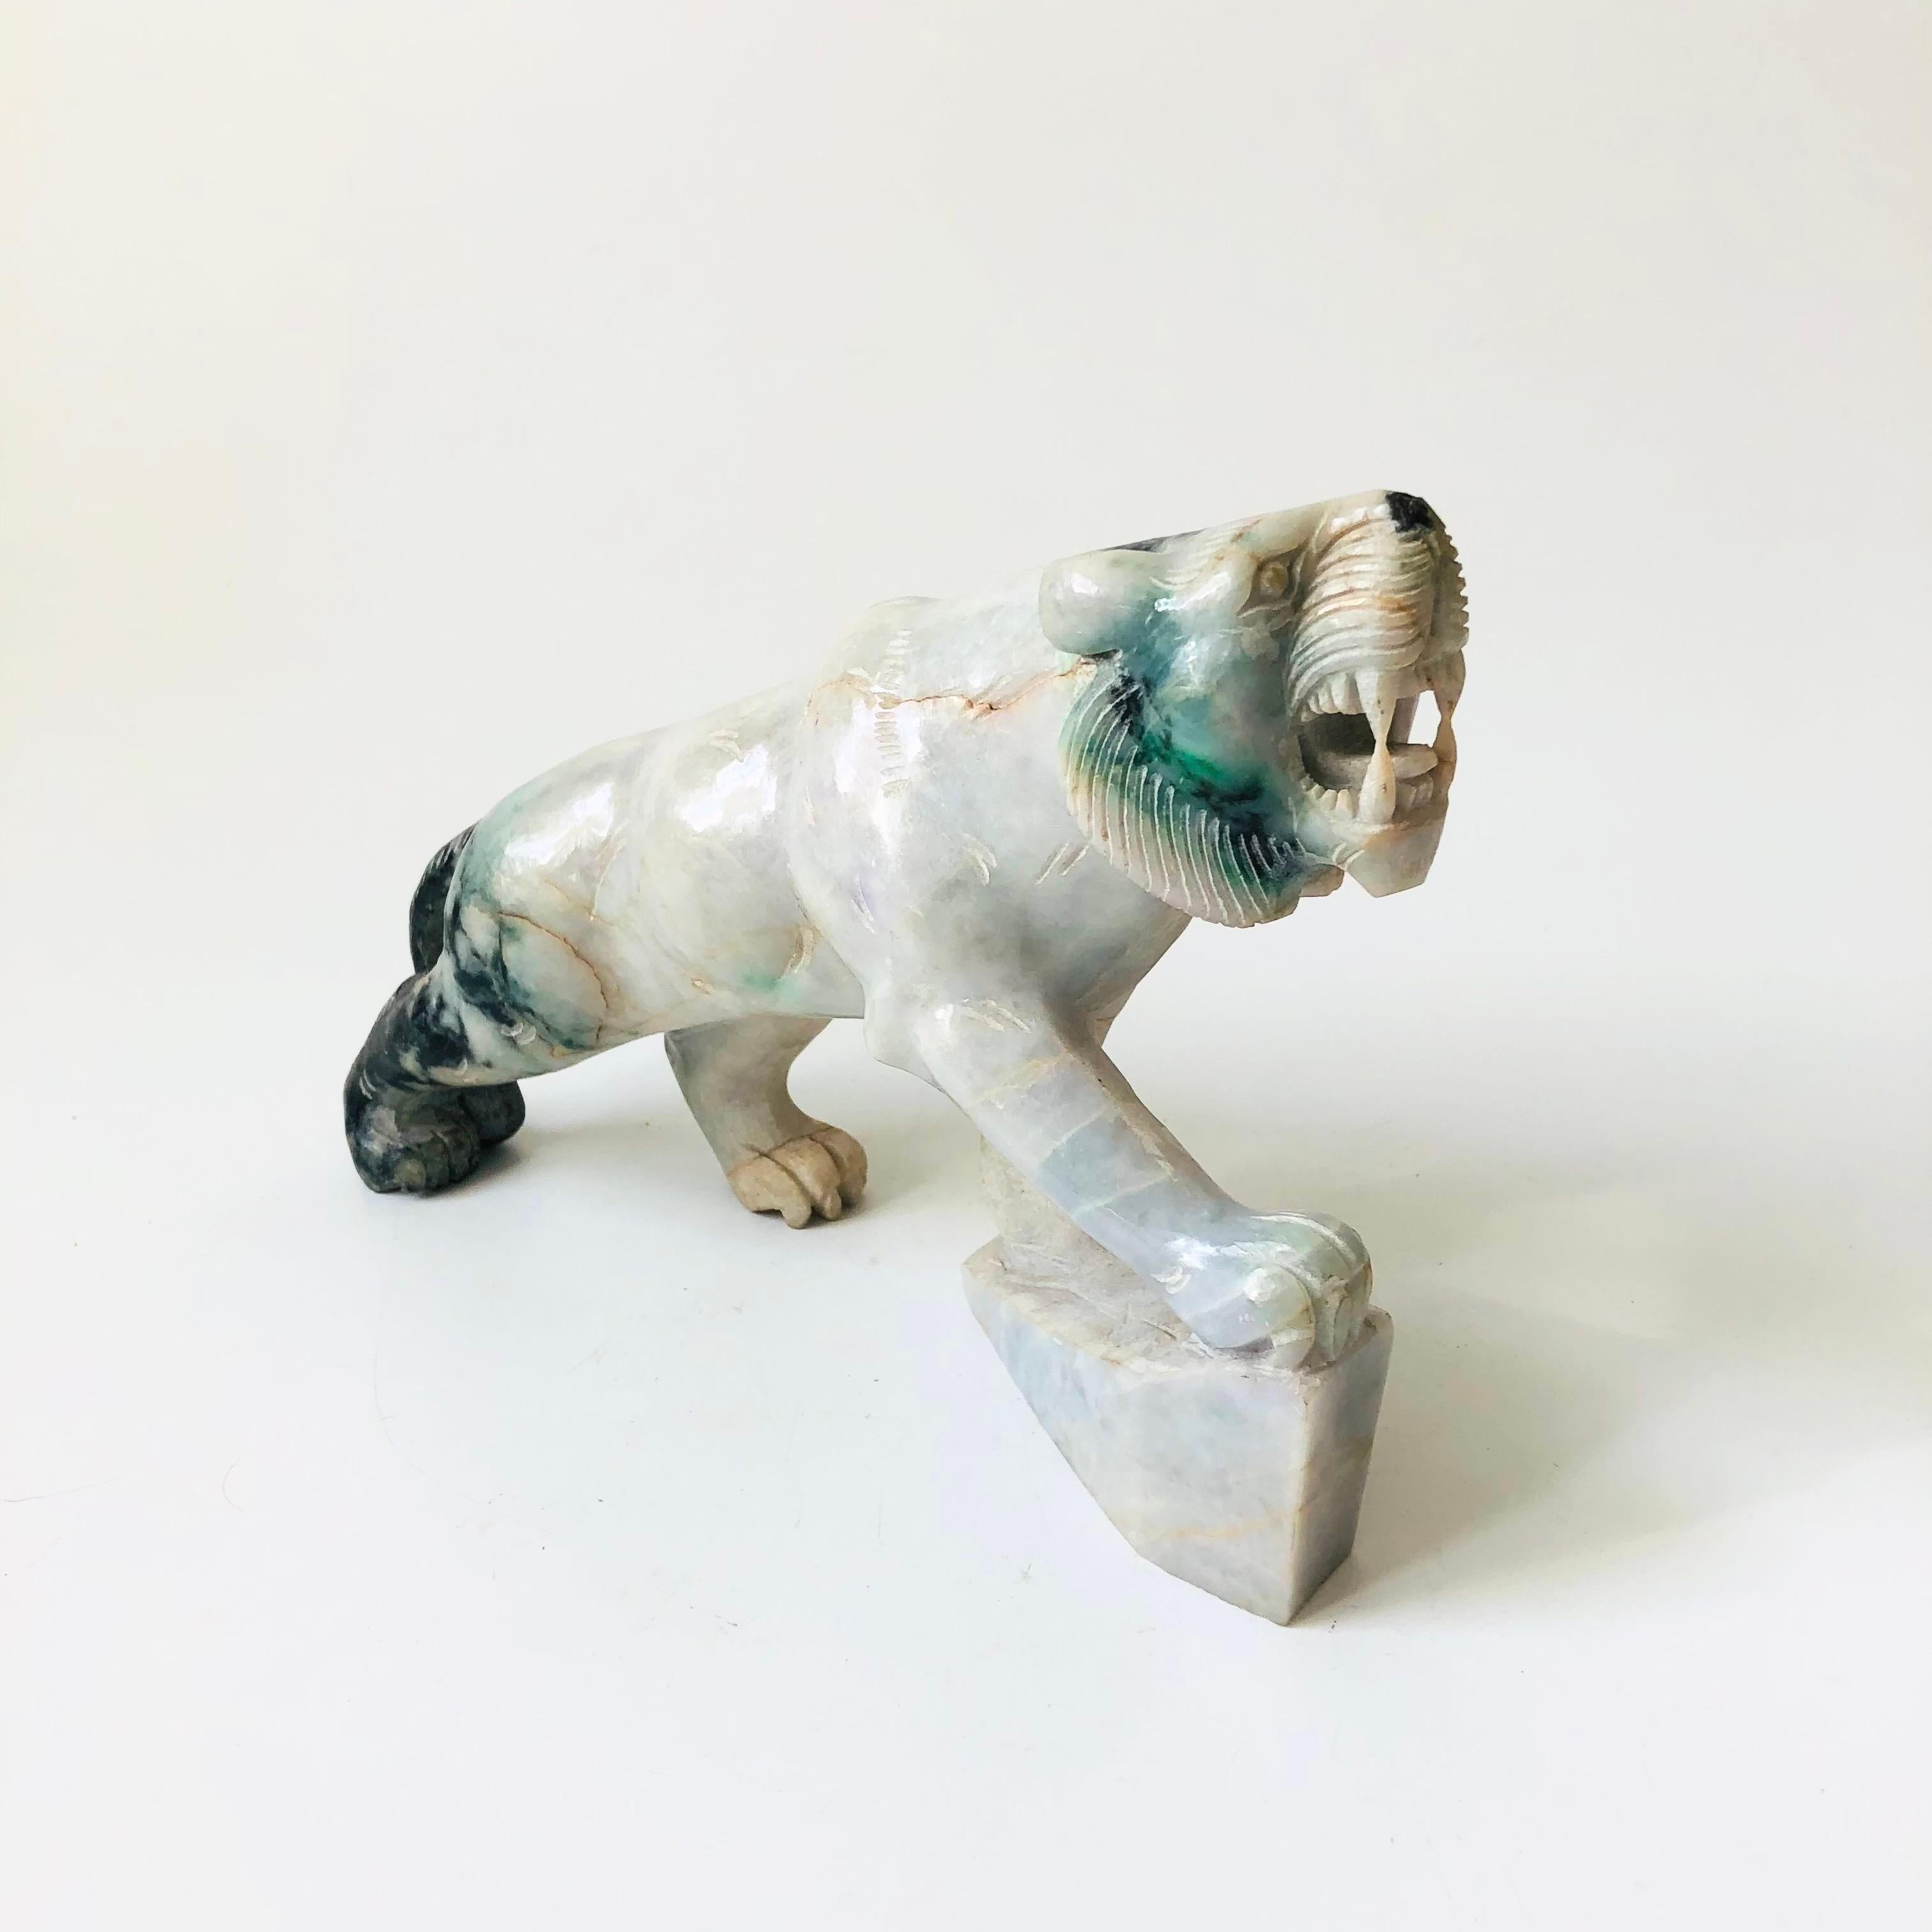 A vintage carved jade tiger. Beautiful veining and coloring to the stone that ranges from dark to pale greens. Lots of detailing carved into the stone. Good medium side to use as a statement piece.

